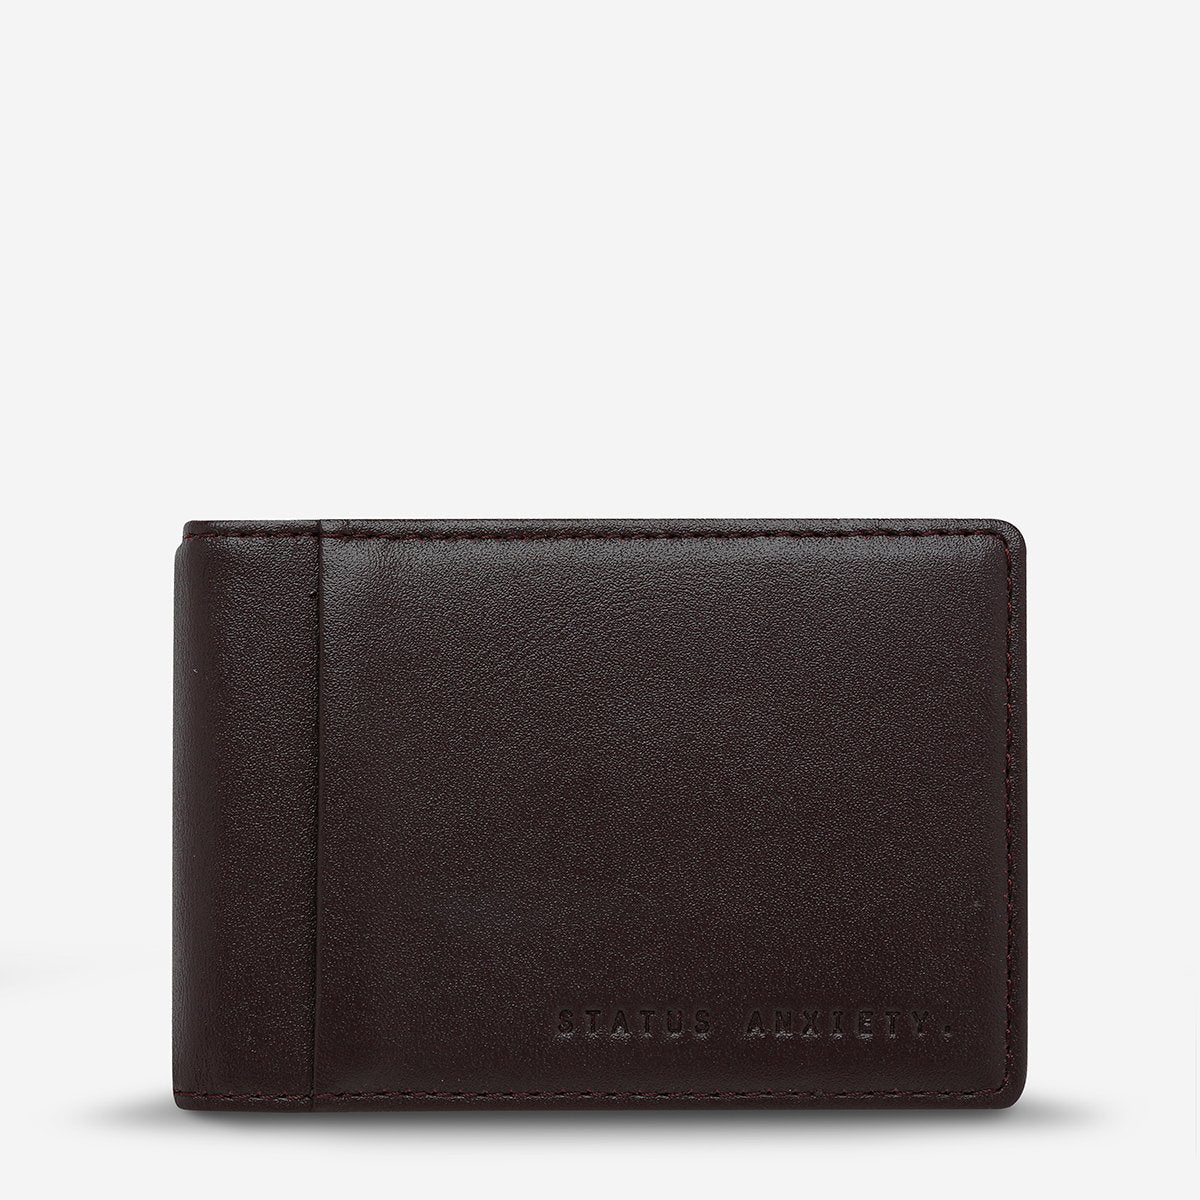 status anxiety wallet melvin brown front